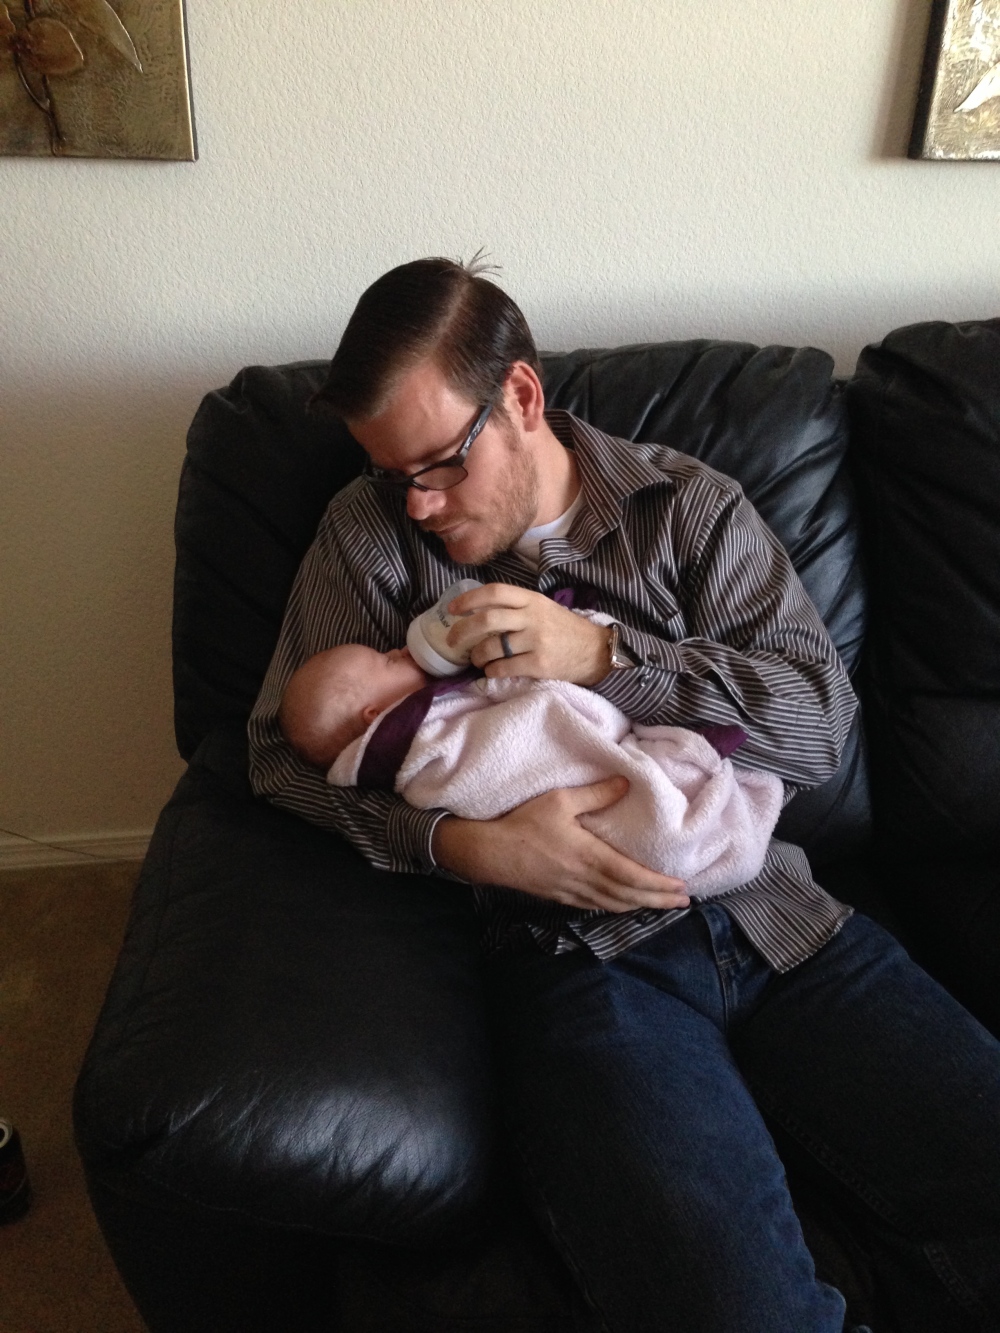 My husband spoiling his baby niece.